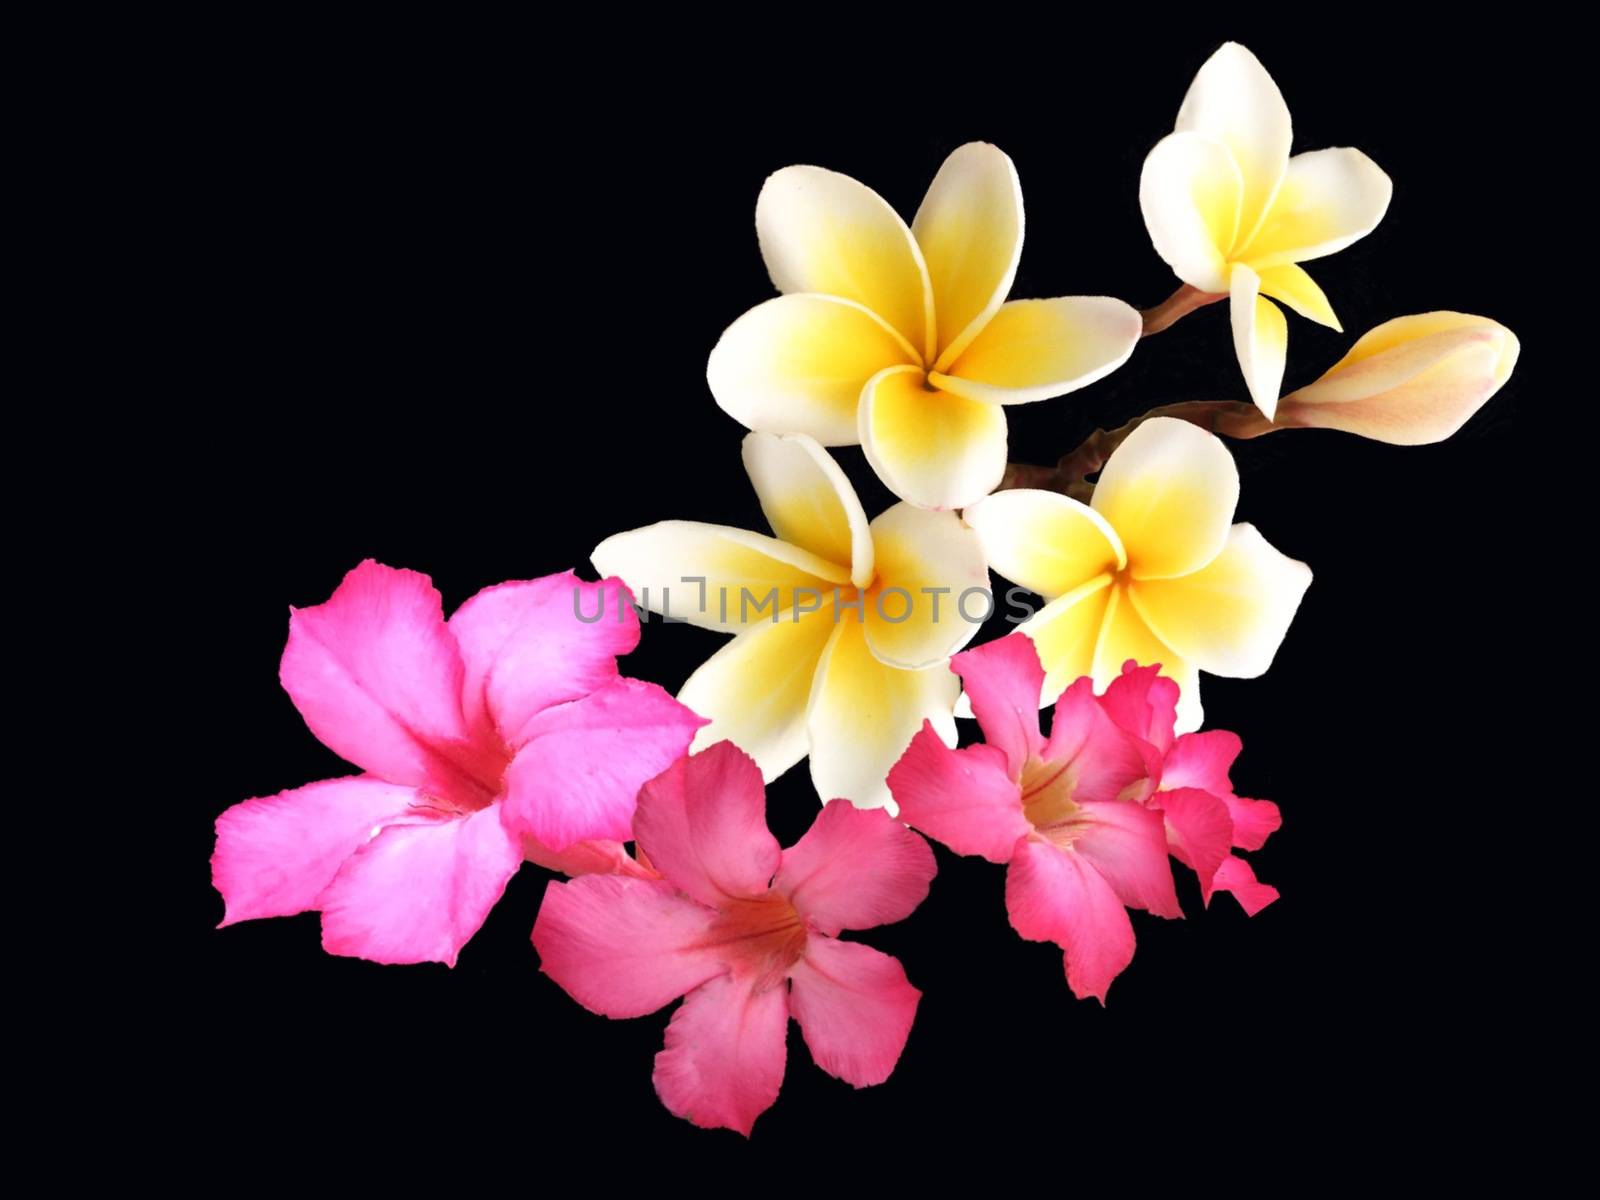 Plumeria exotic tropical flowers on black background for design. by Margolana